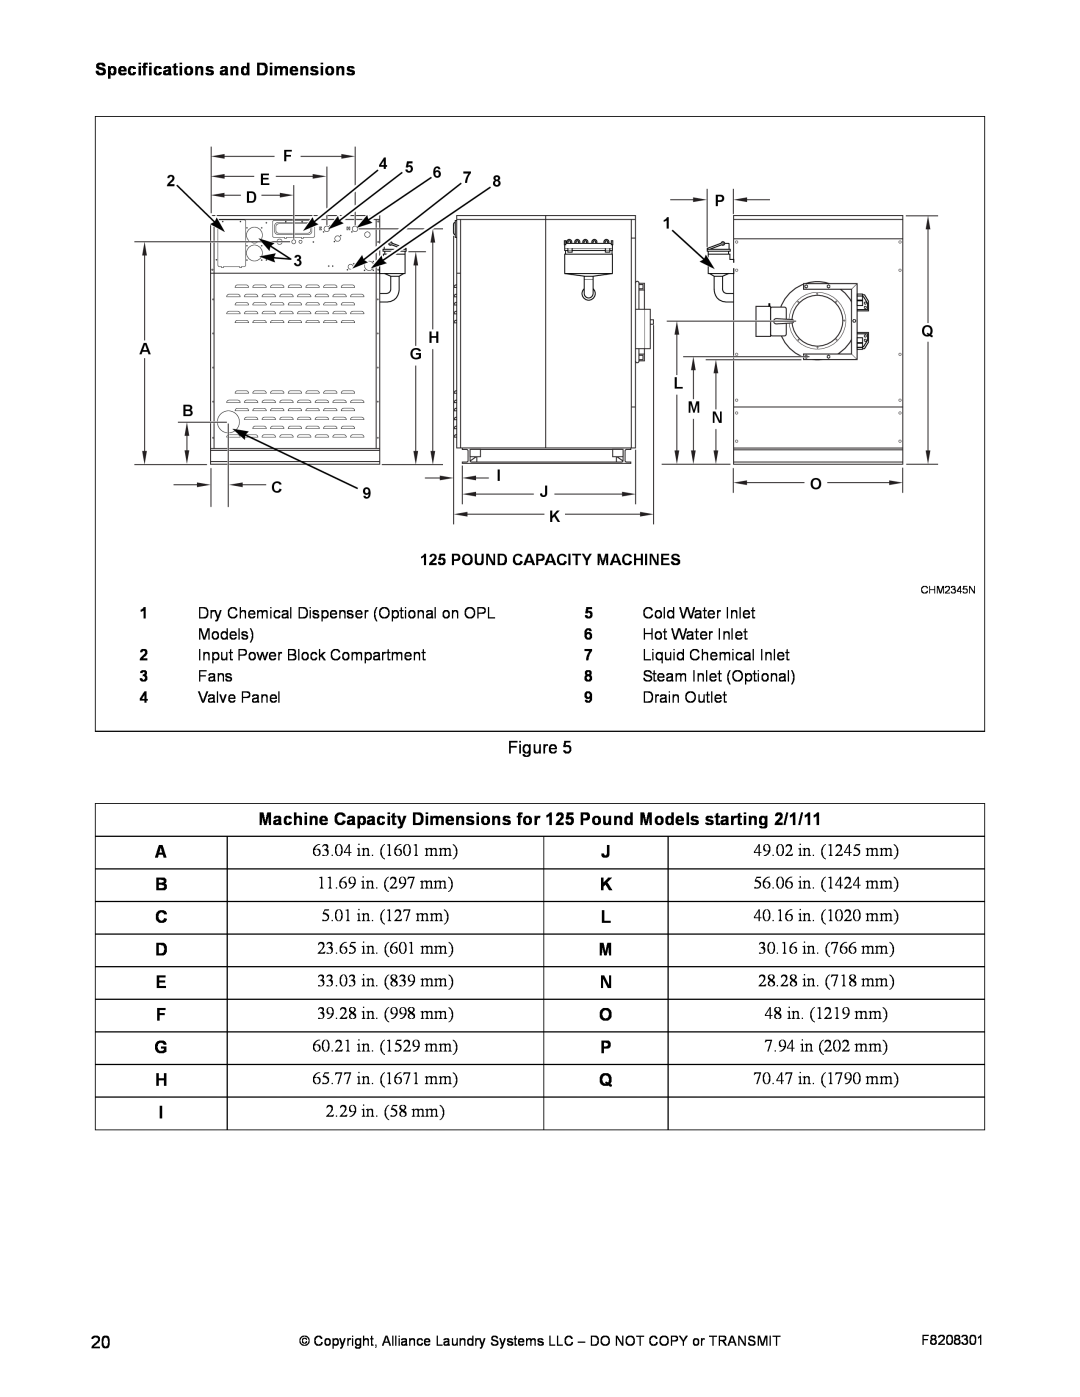 Alliance Laundry Systems CHM1772C manual Specifications and Dimensions, 63.04 in. 1601 mm 